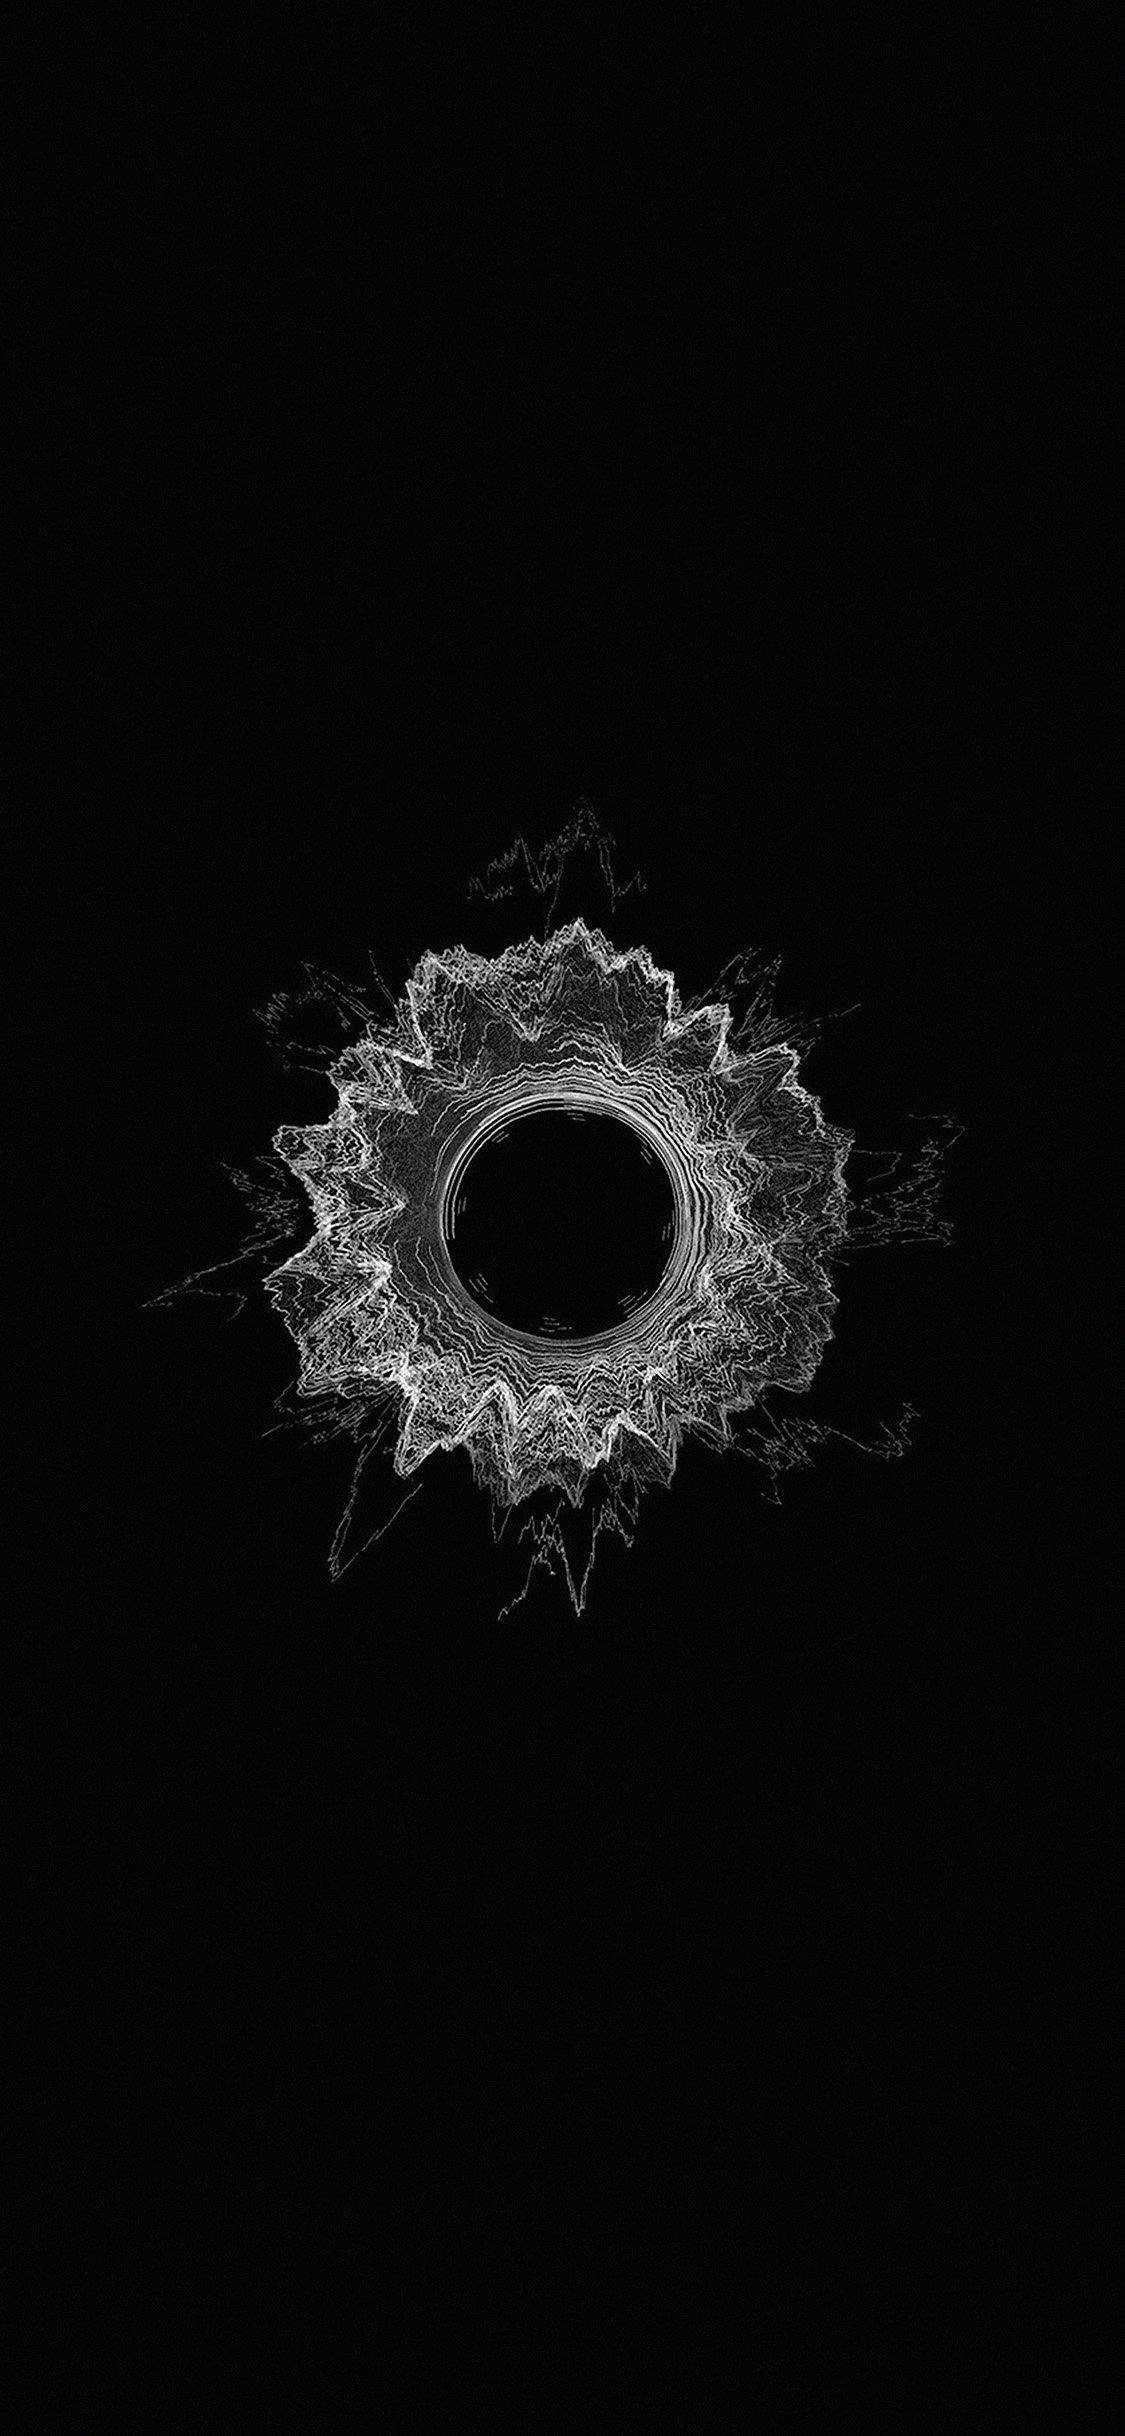 Dark hole black minimal pattern backgrounds iPhone X Wallpapers